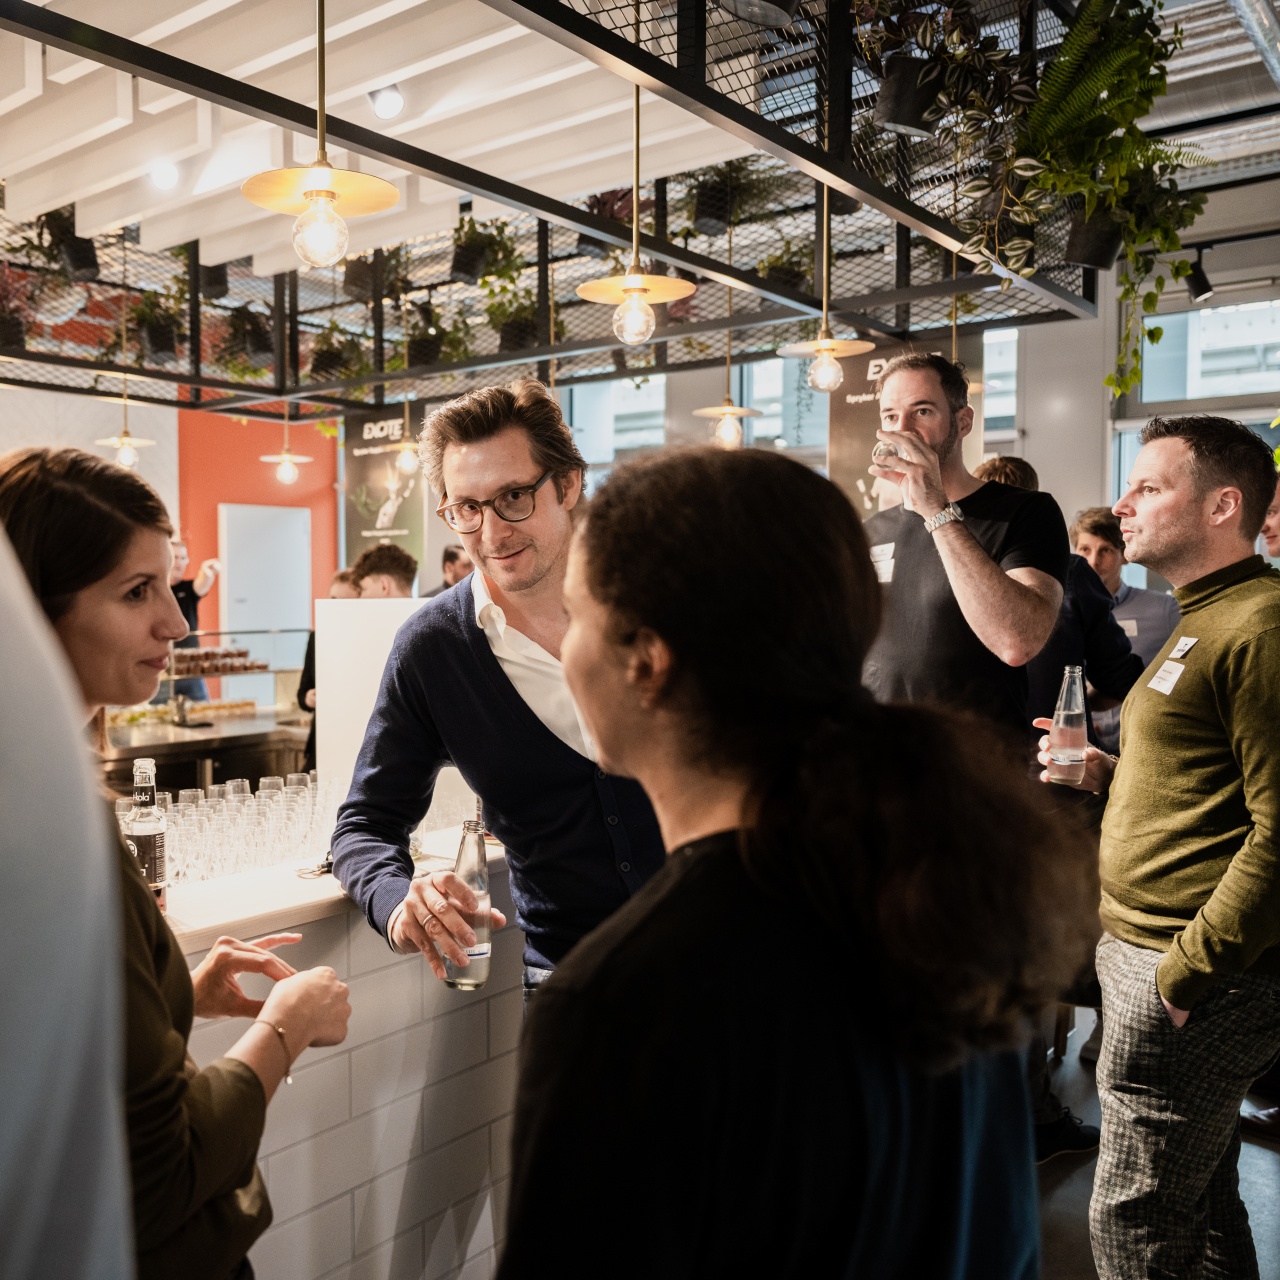 A group of people are socializing at an indoor event. They are gathered around a white countertop bar with drinks. The background has hanging plants, warm lighting, and a few posters. Everyone appears engaged in conversation.